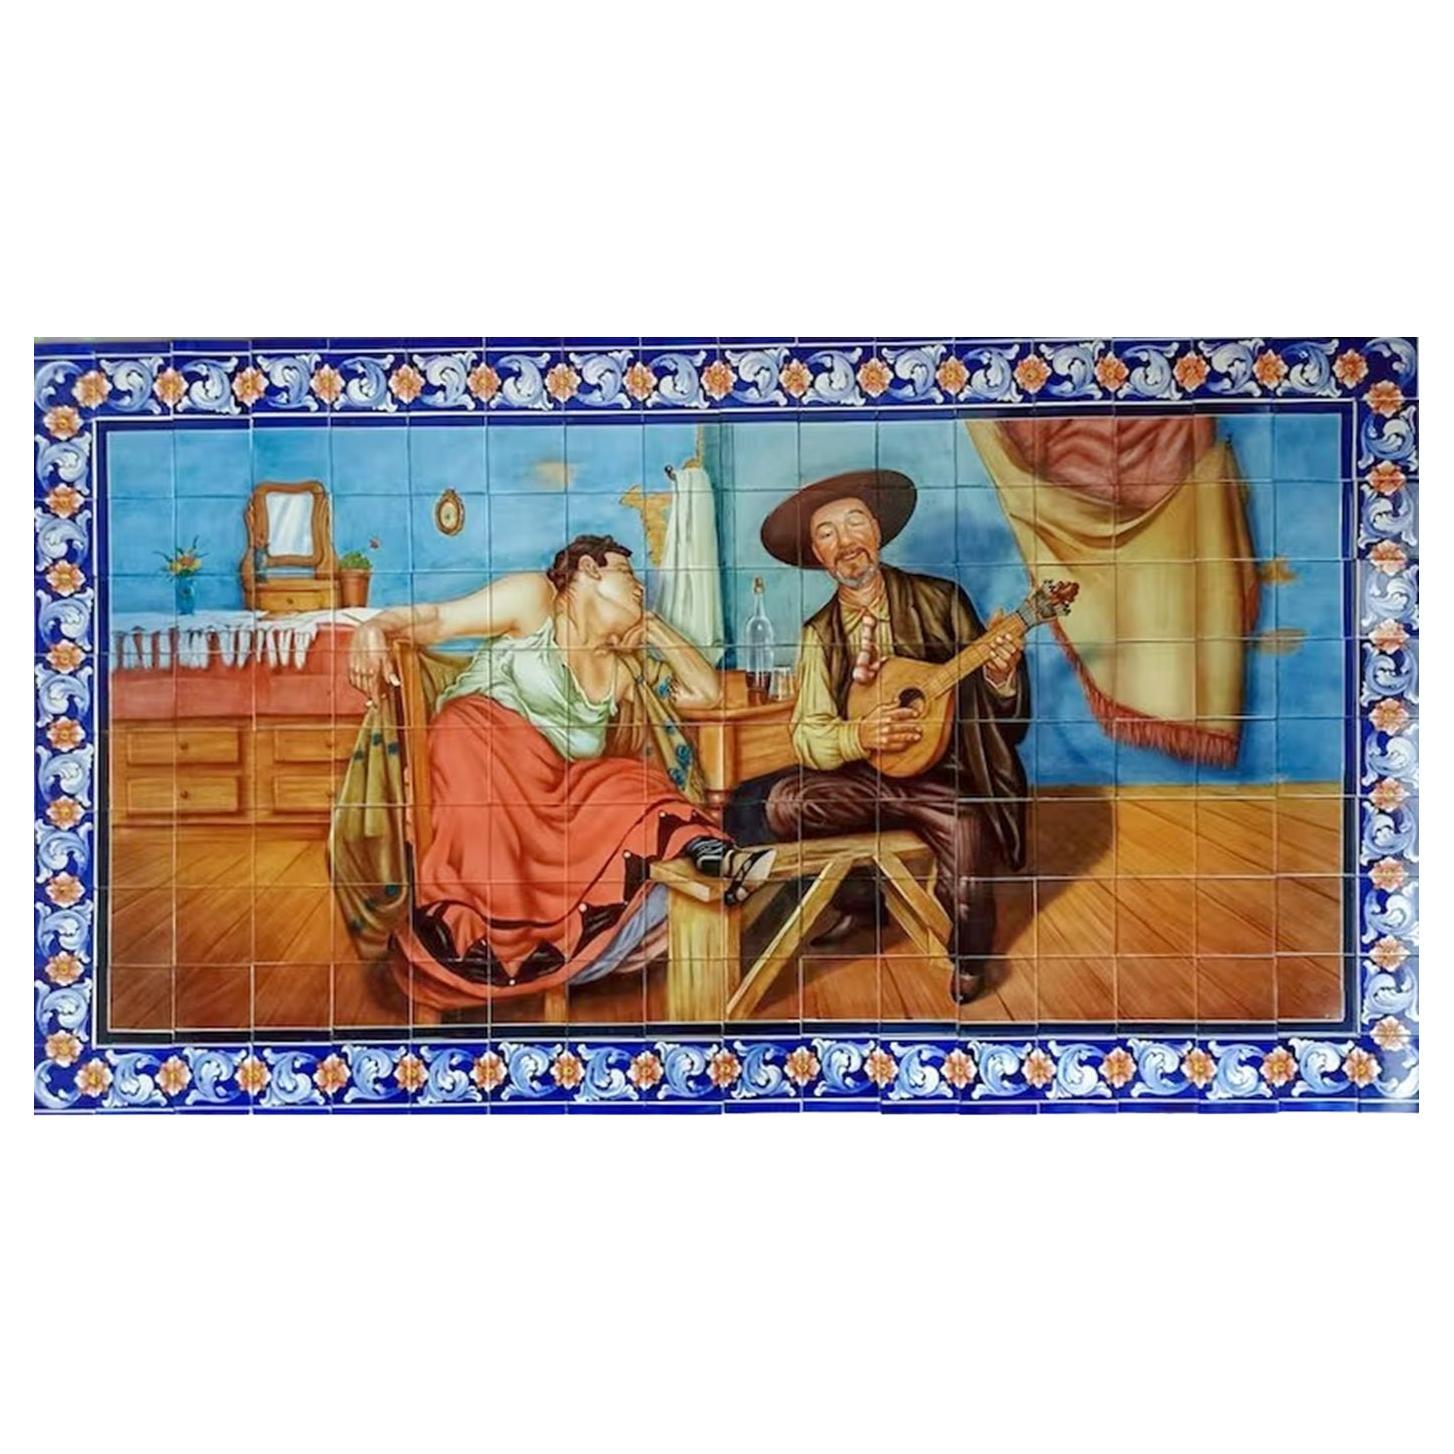 Azulejos Portuguese Hand Painted Tile Mural "Fado" Signed by Artist